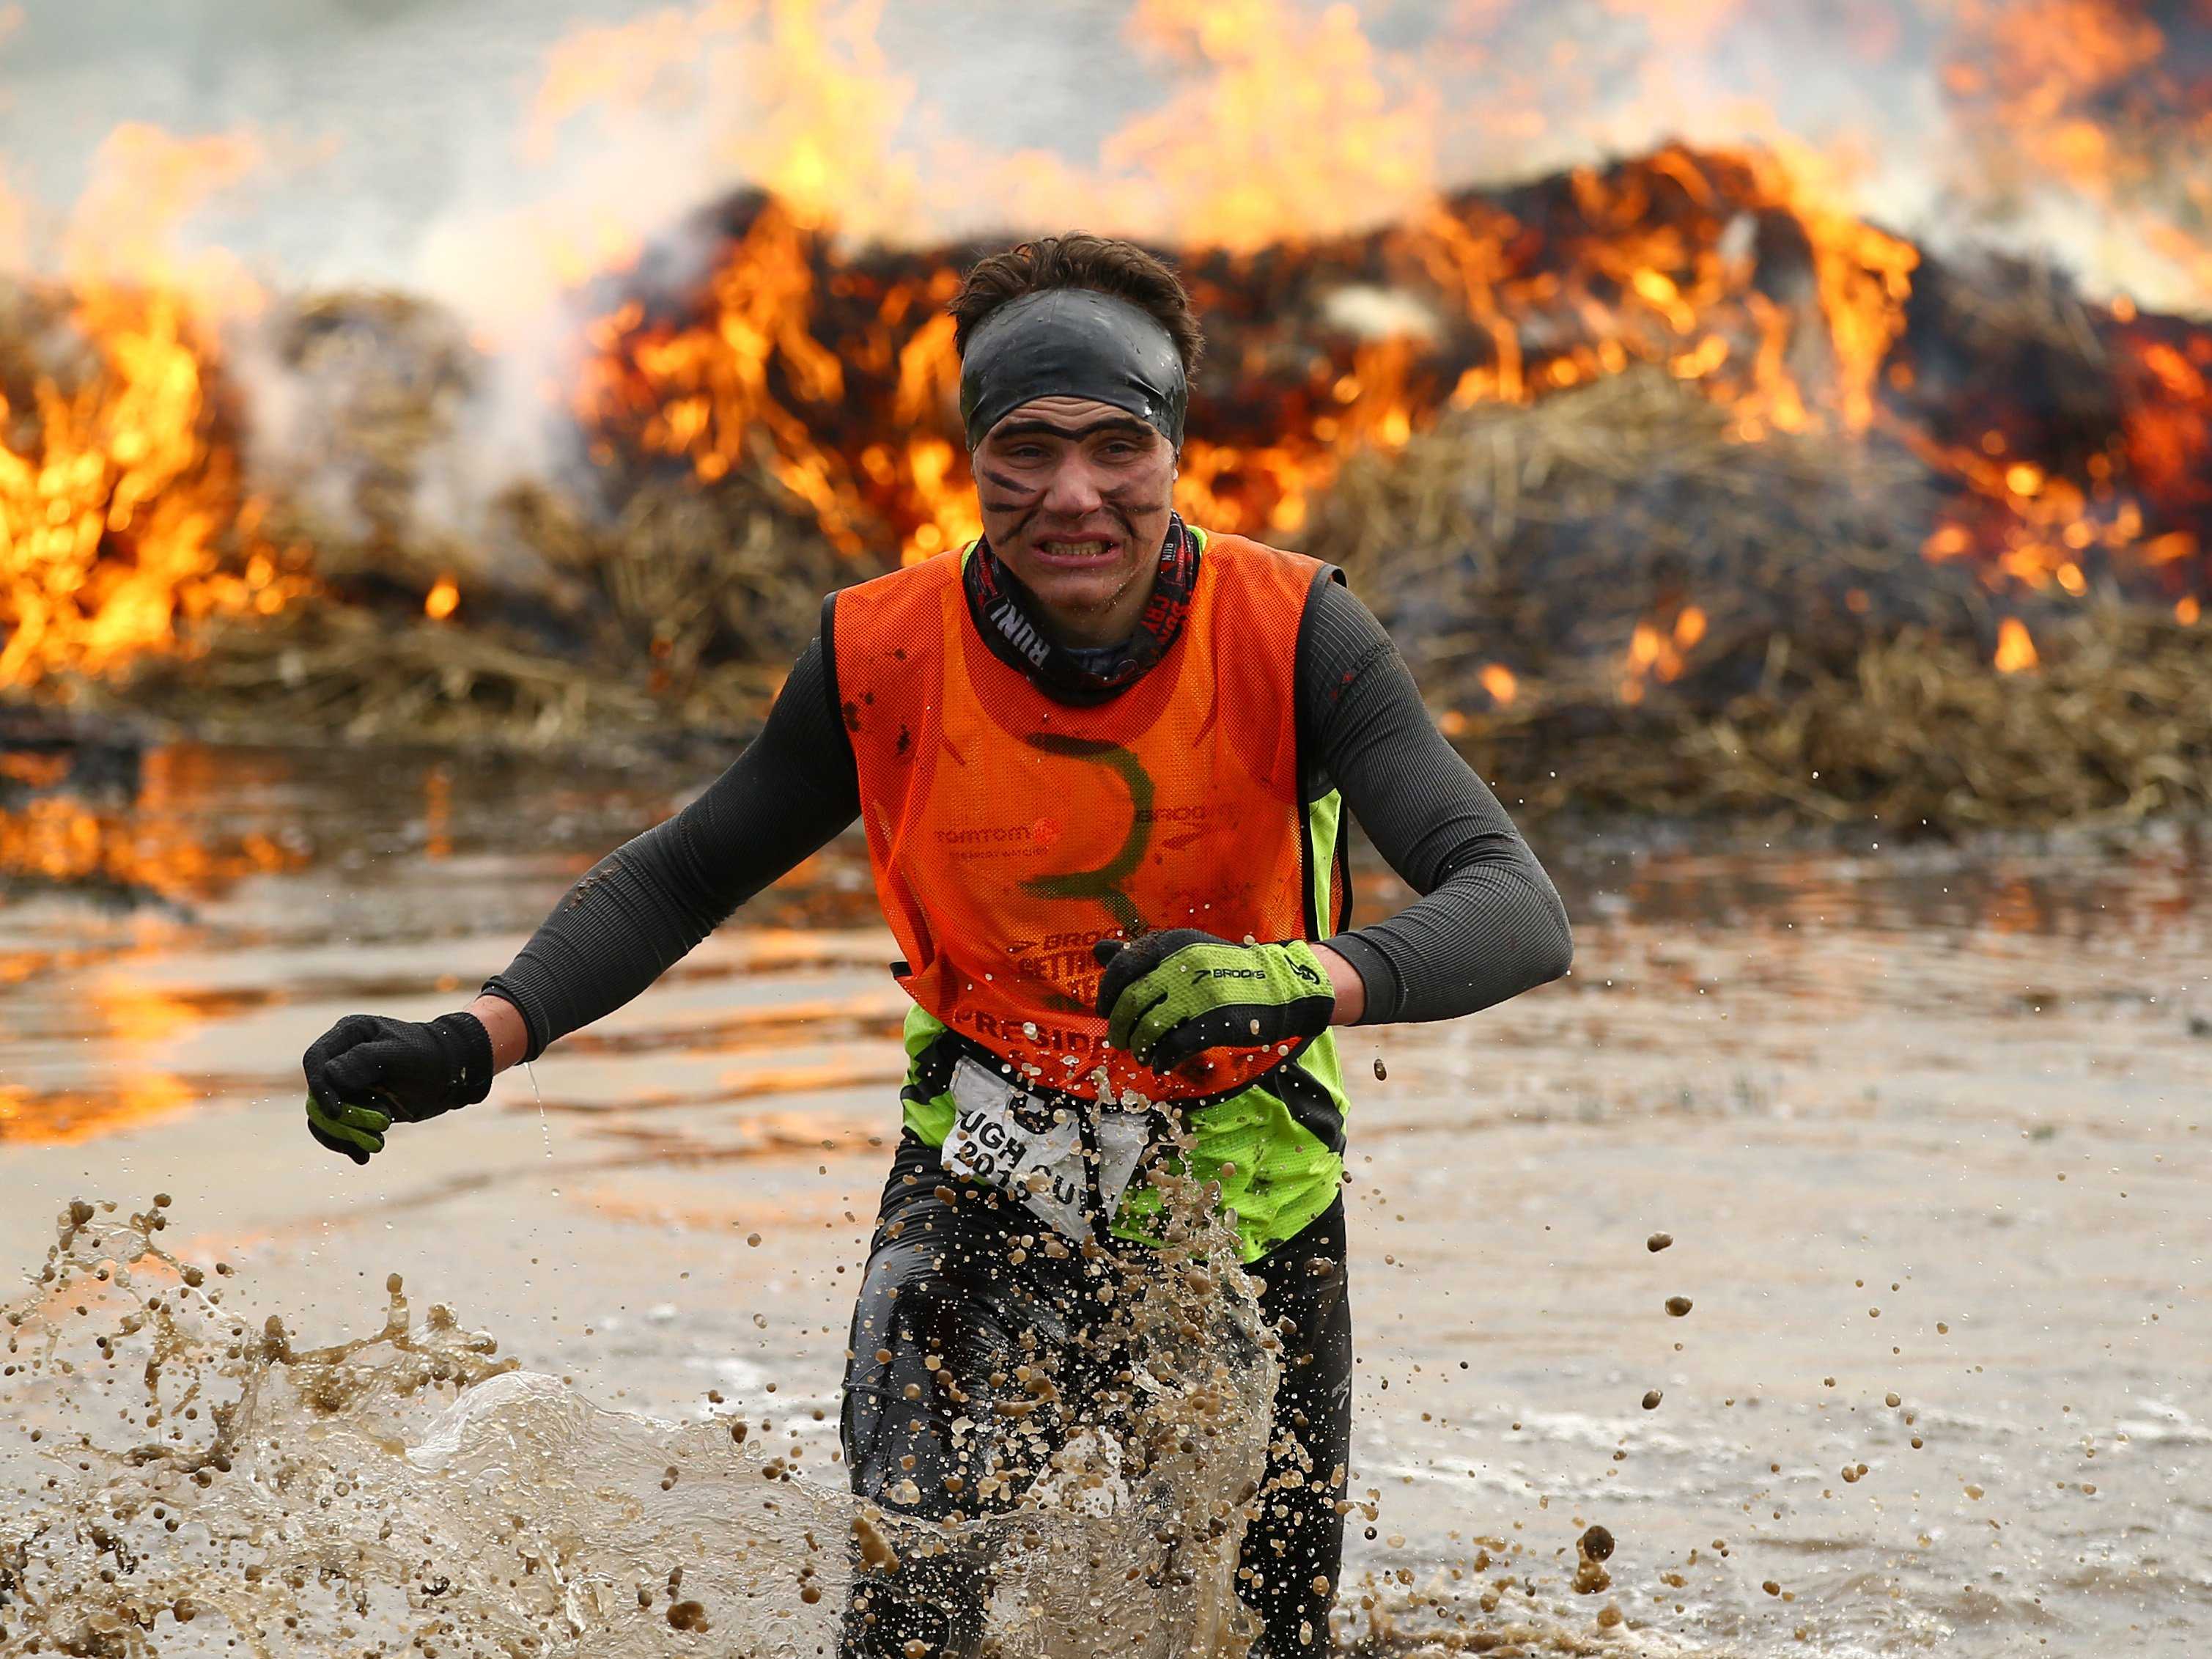 Pictures Of Tough Guy Race Show Hardest Test In World - Business Insider